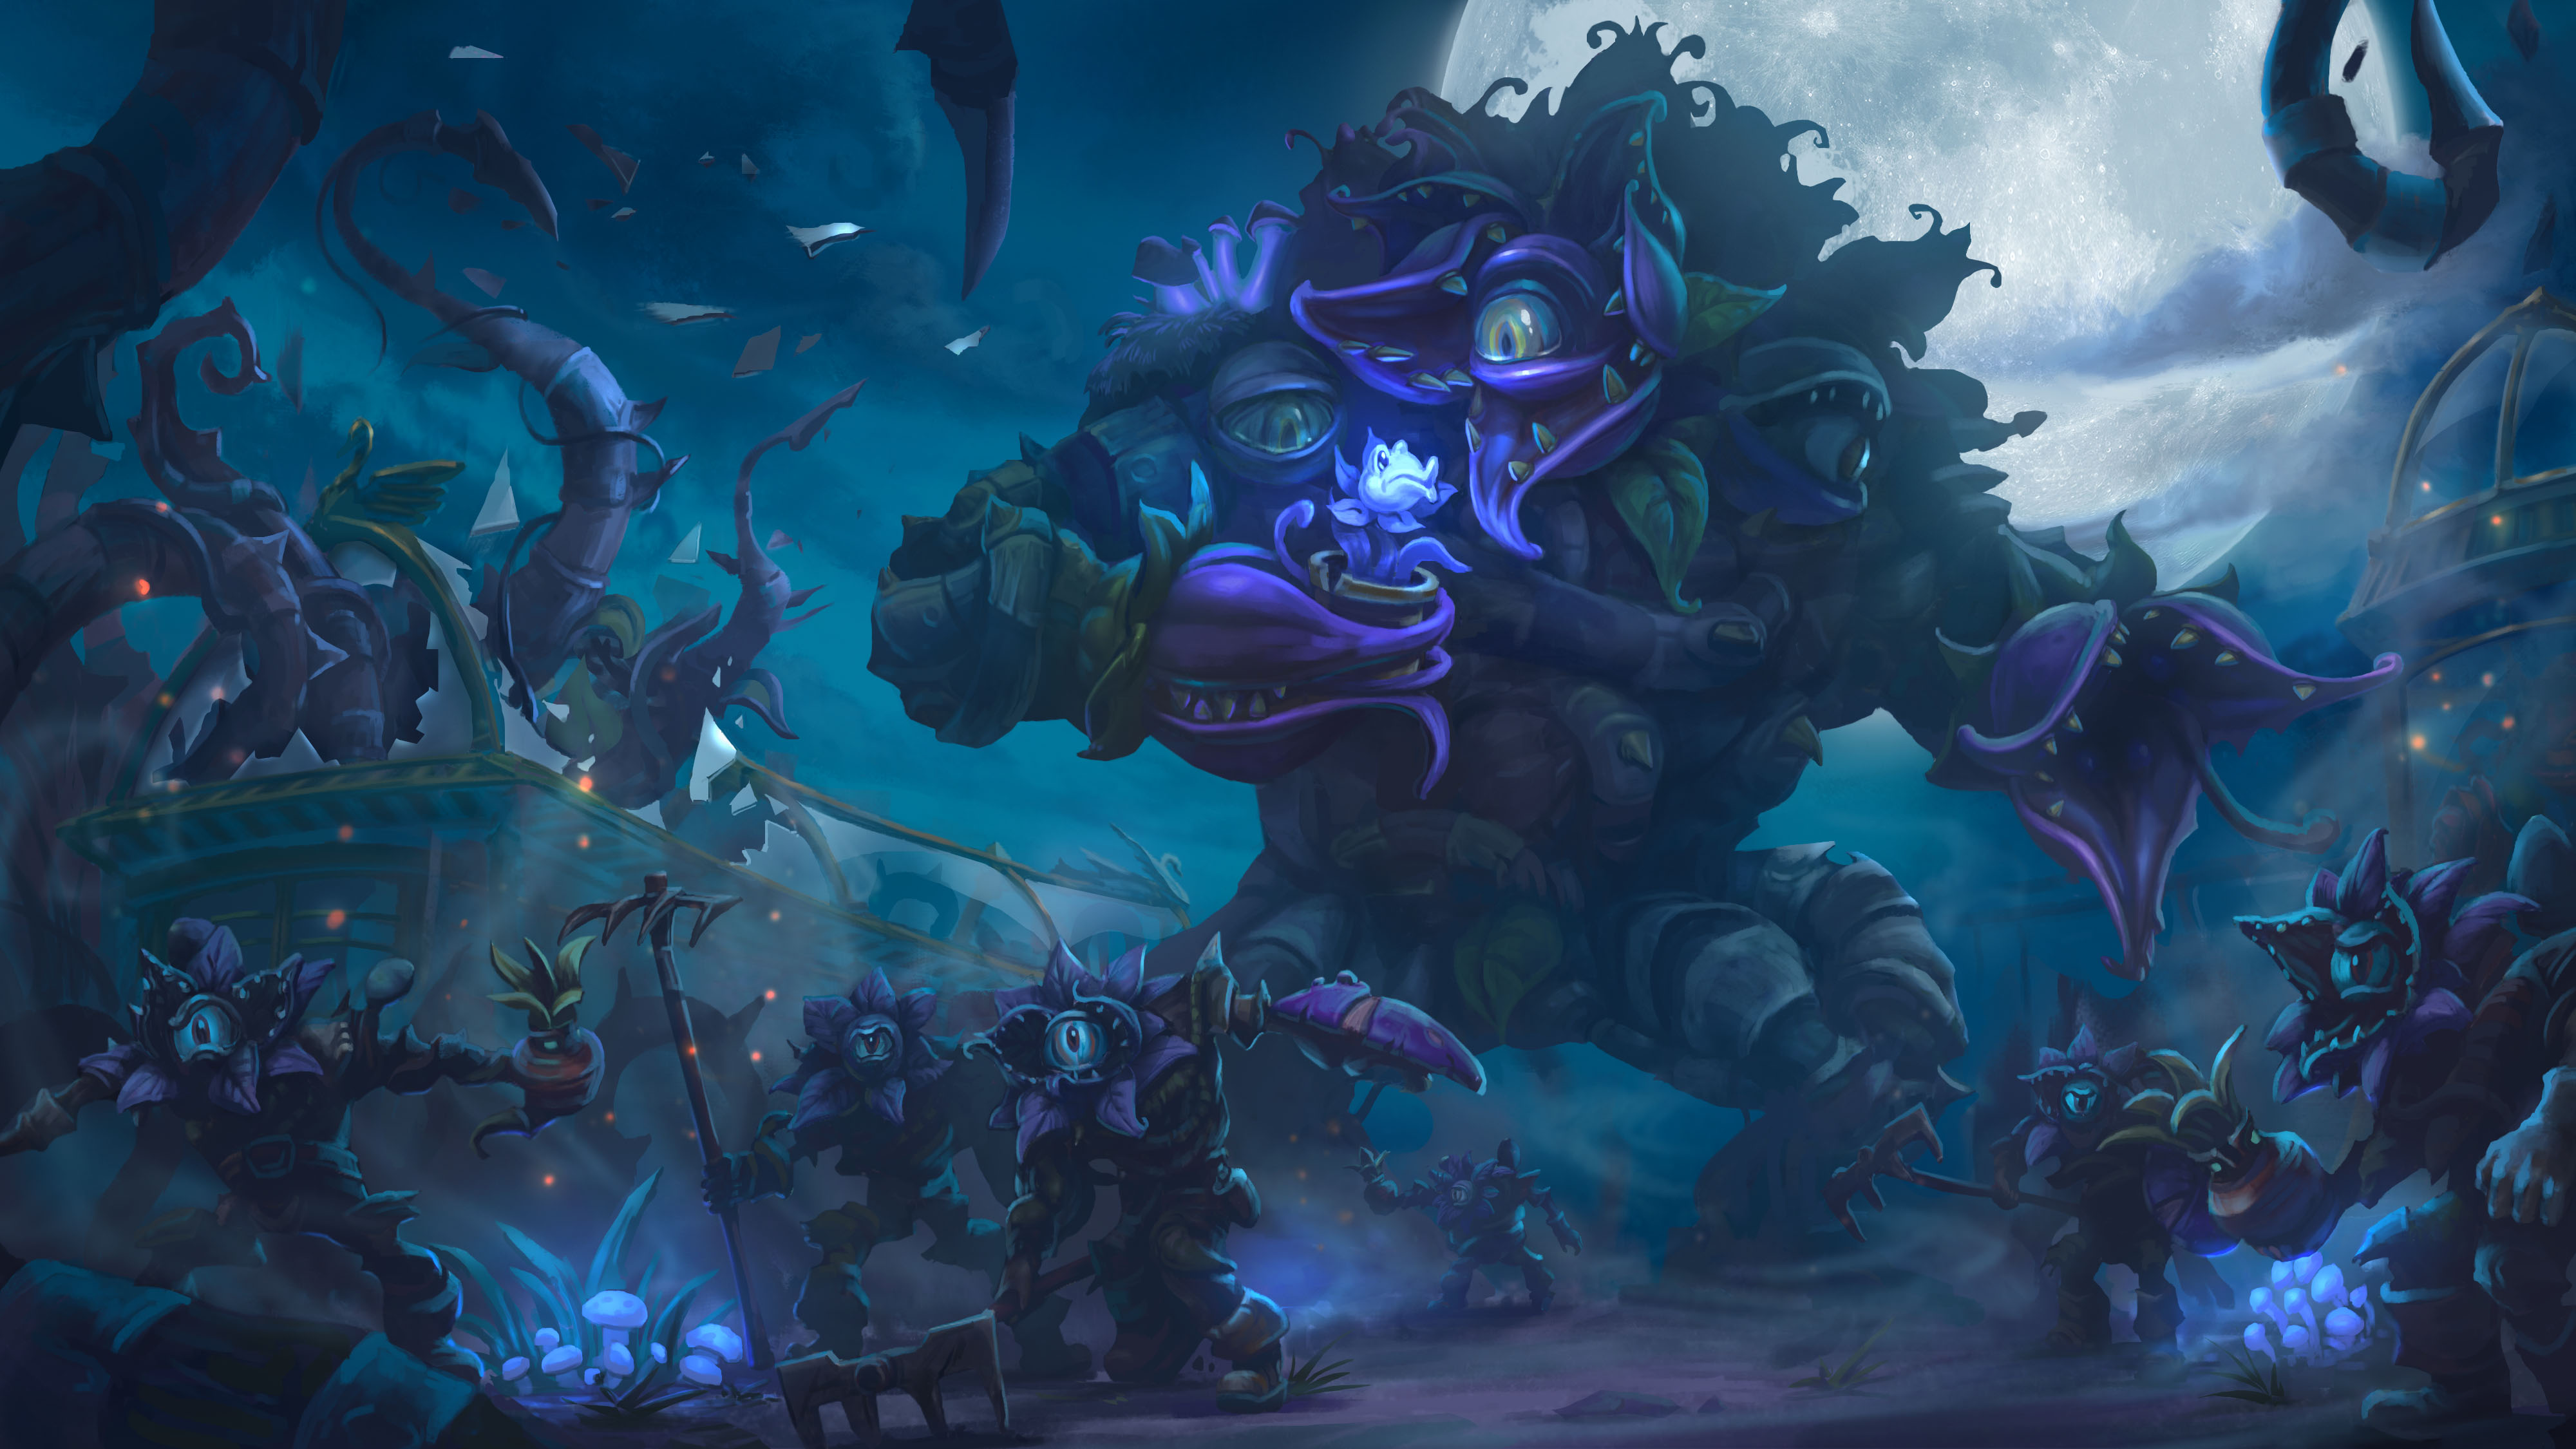 Blizzard shifts developers away from Heroes of the Storm